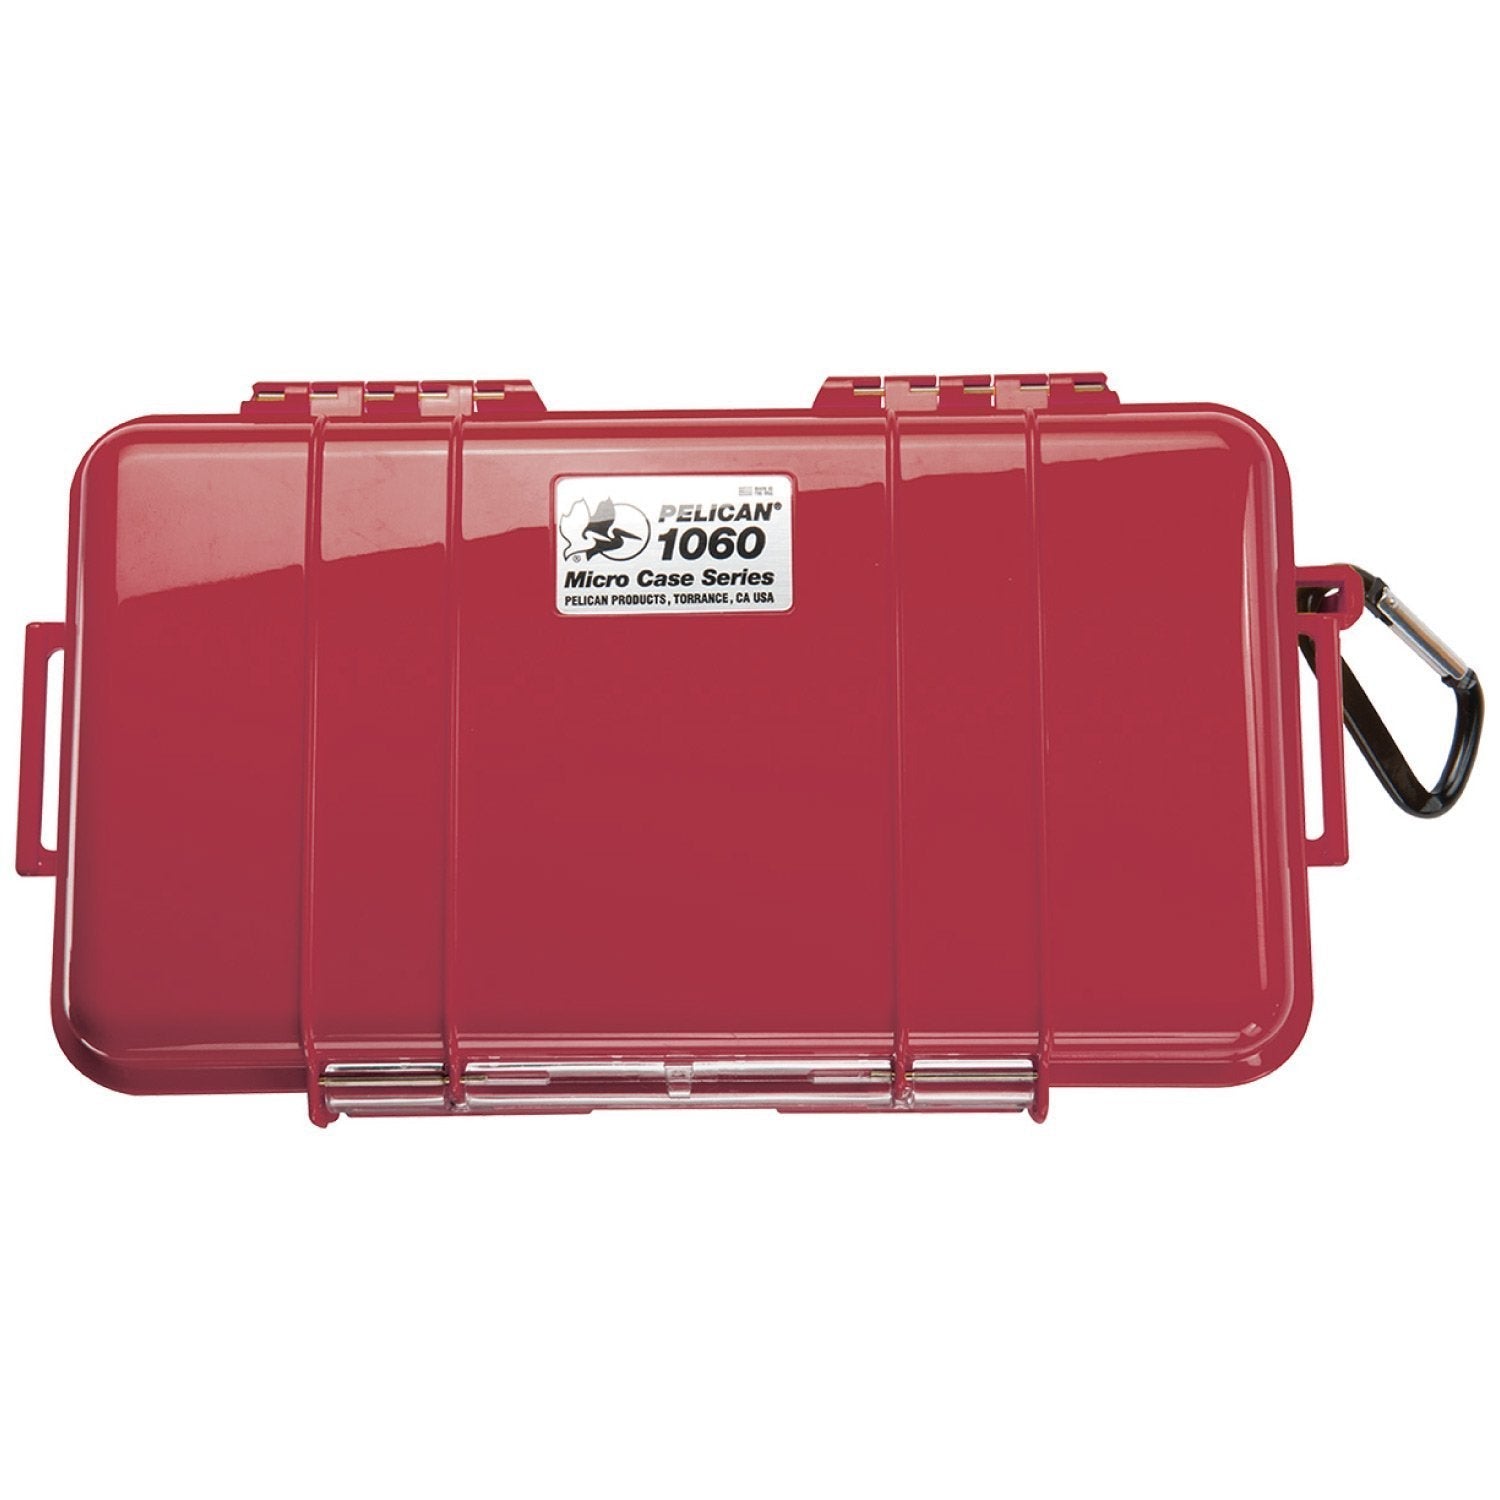 Pelican 1060 Micro Case Cases Pelican Products Red Shell with Black Liner Tactical Gear Supplier Tactical Distributors Australia